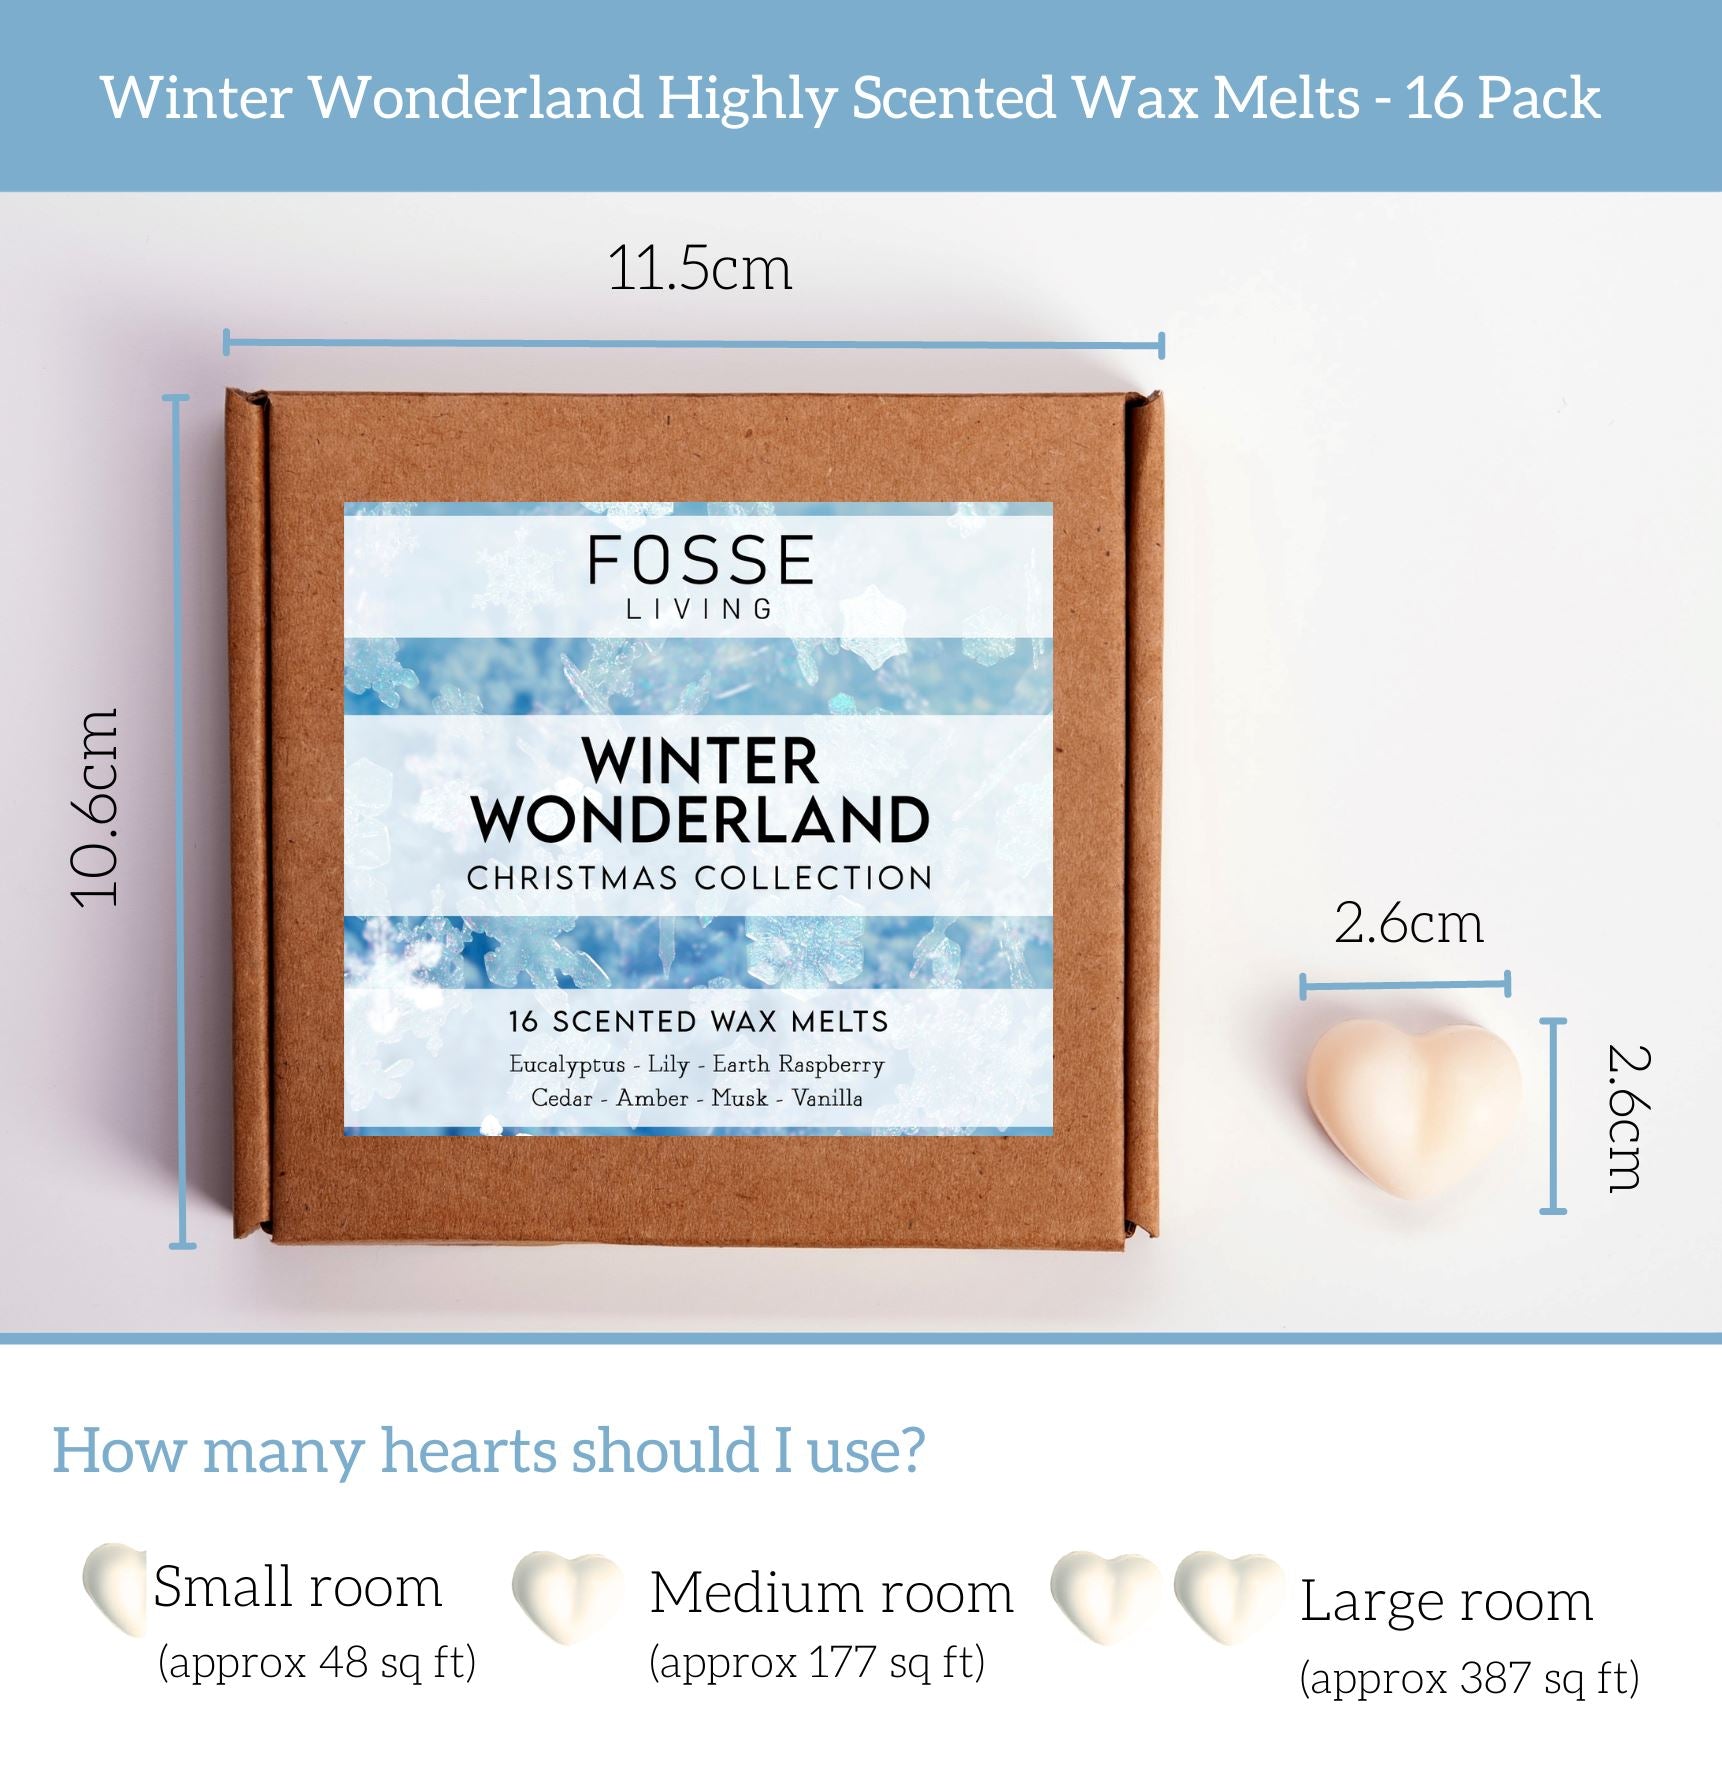 Winter Wonderland Highly Scented christmas and spring Soy Wax Melt Hearts - 16 Pack (Limited Edition) Fosse Living dimension information